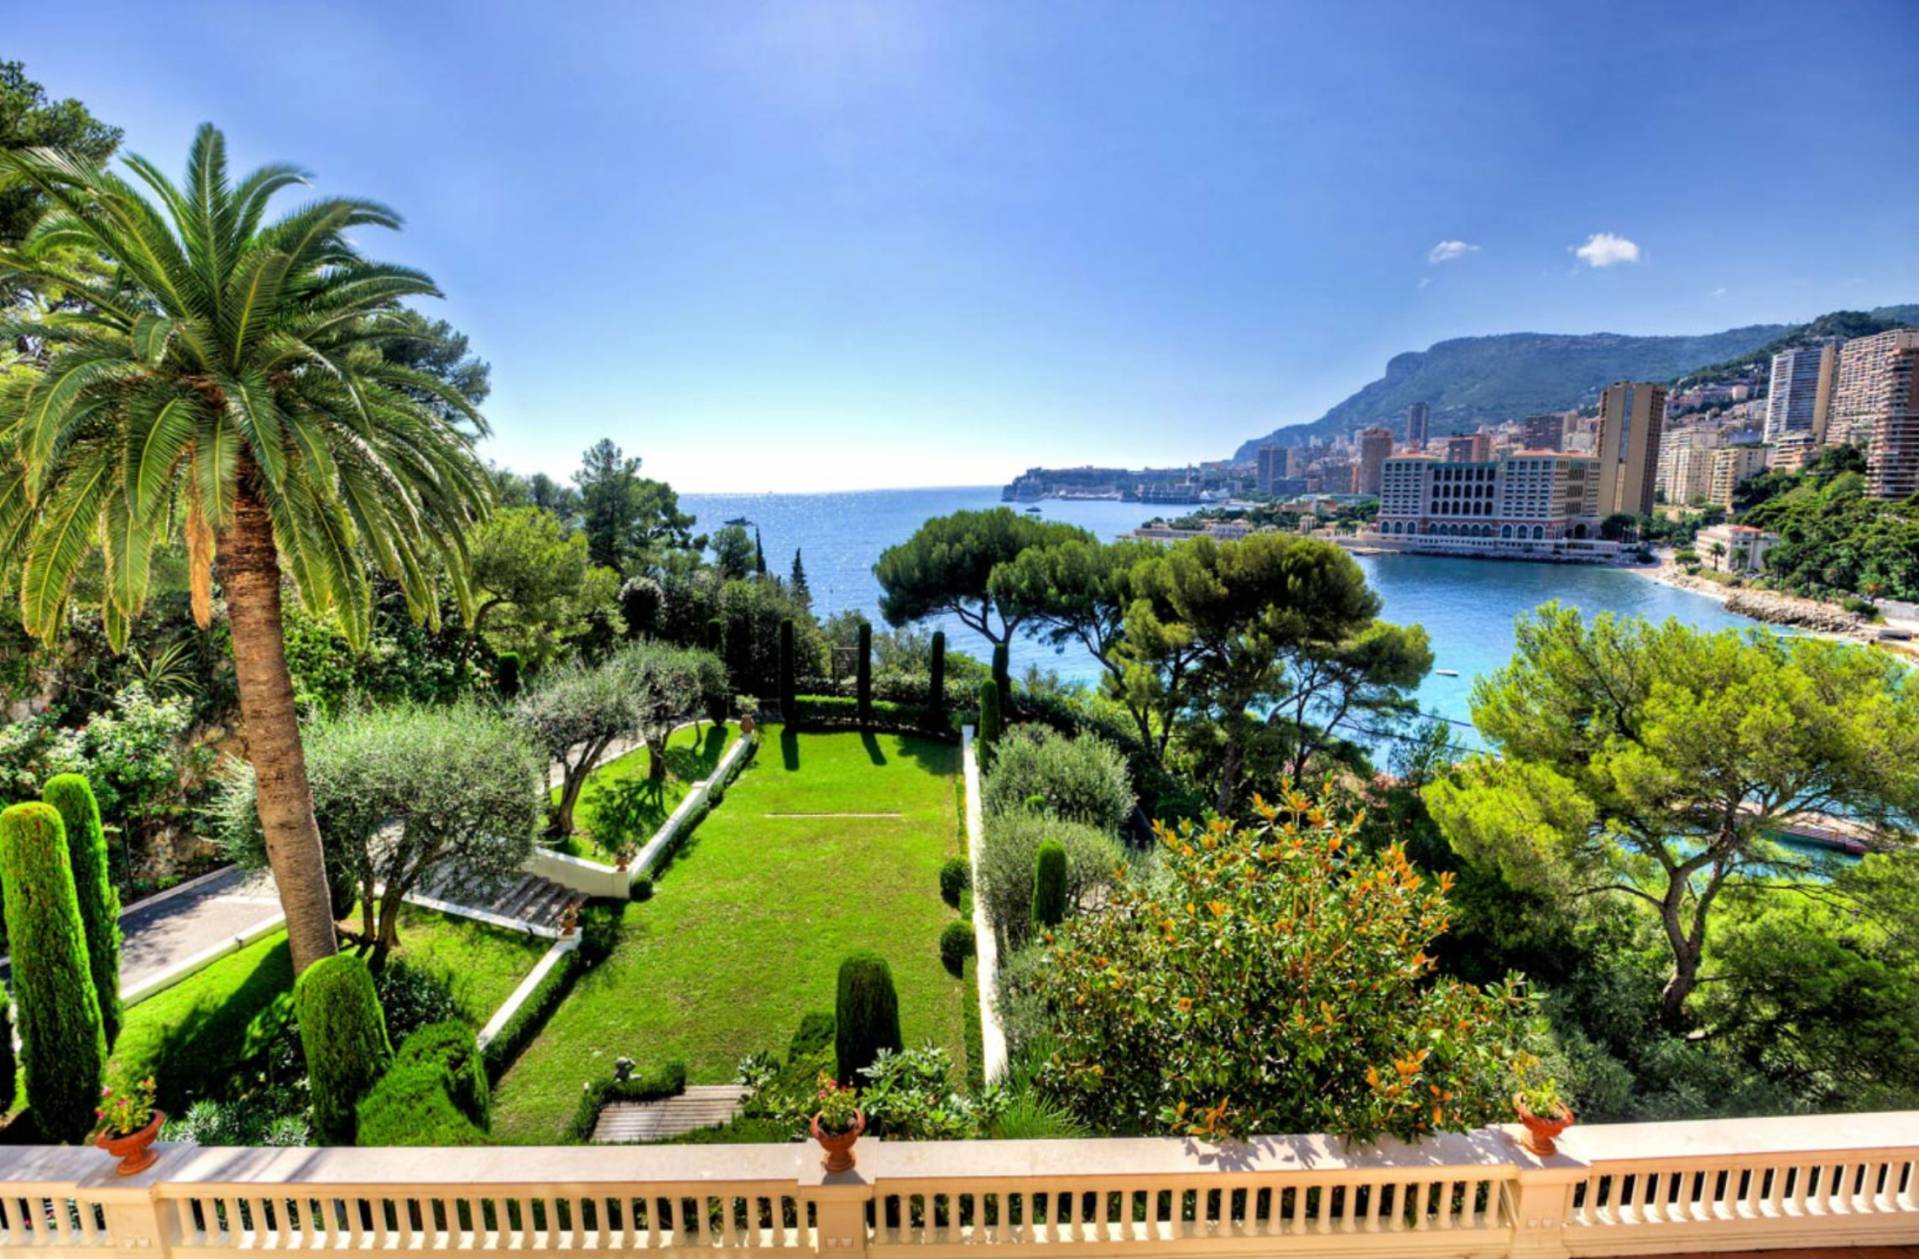 How to become a resident of Monaco